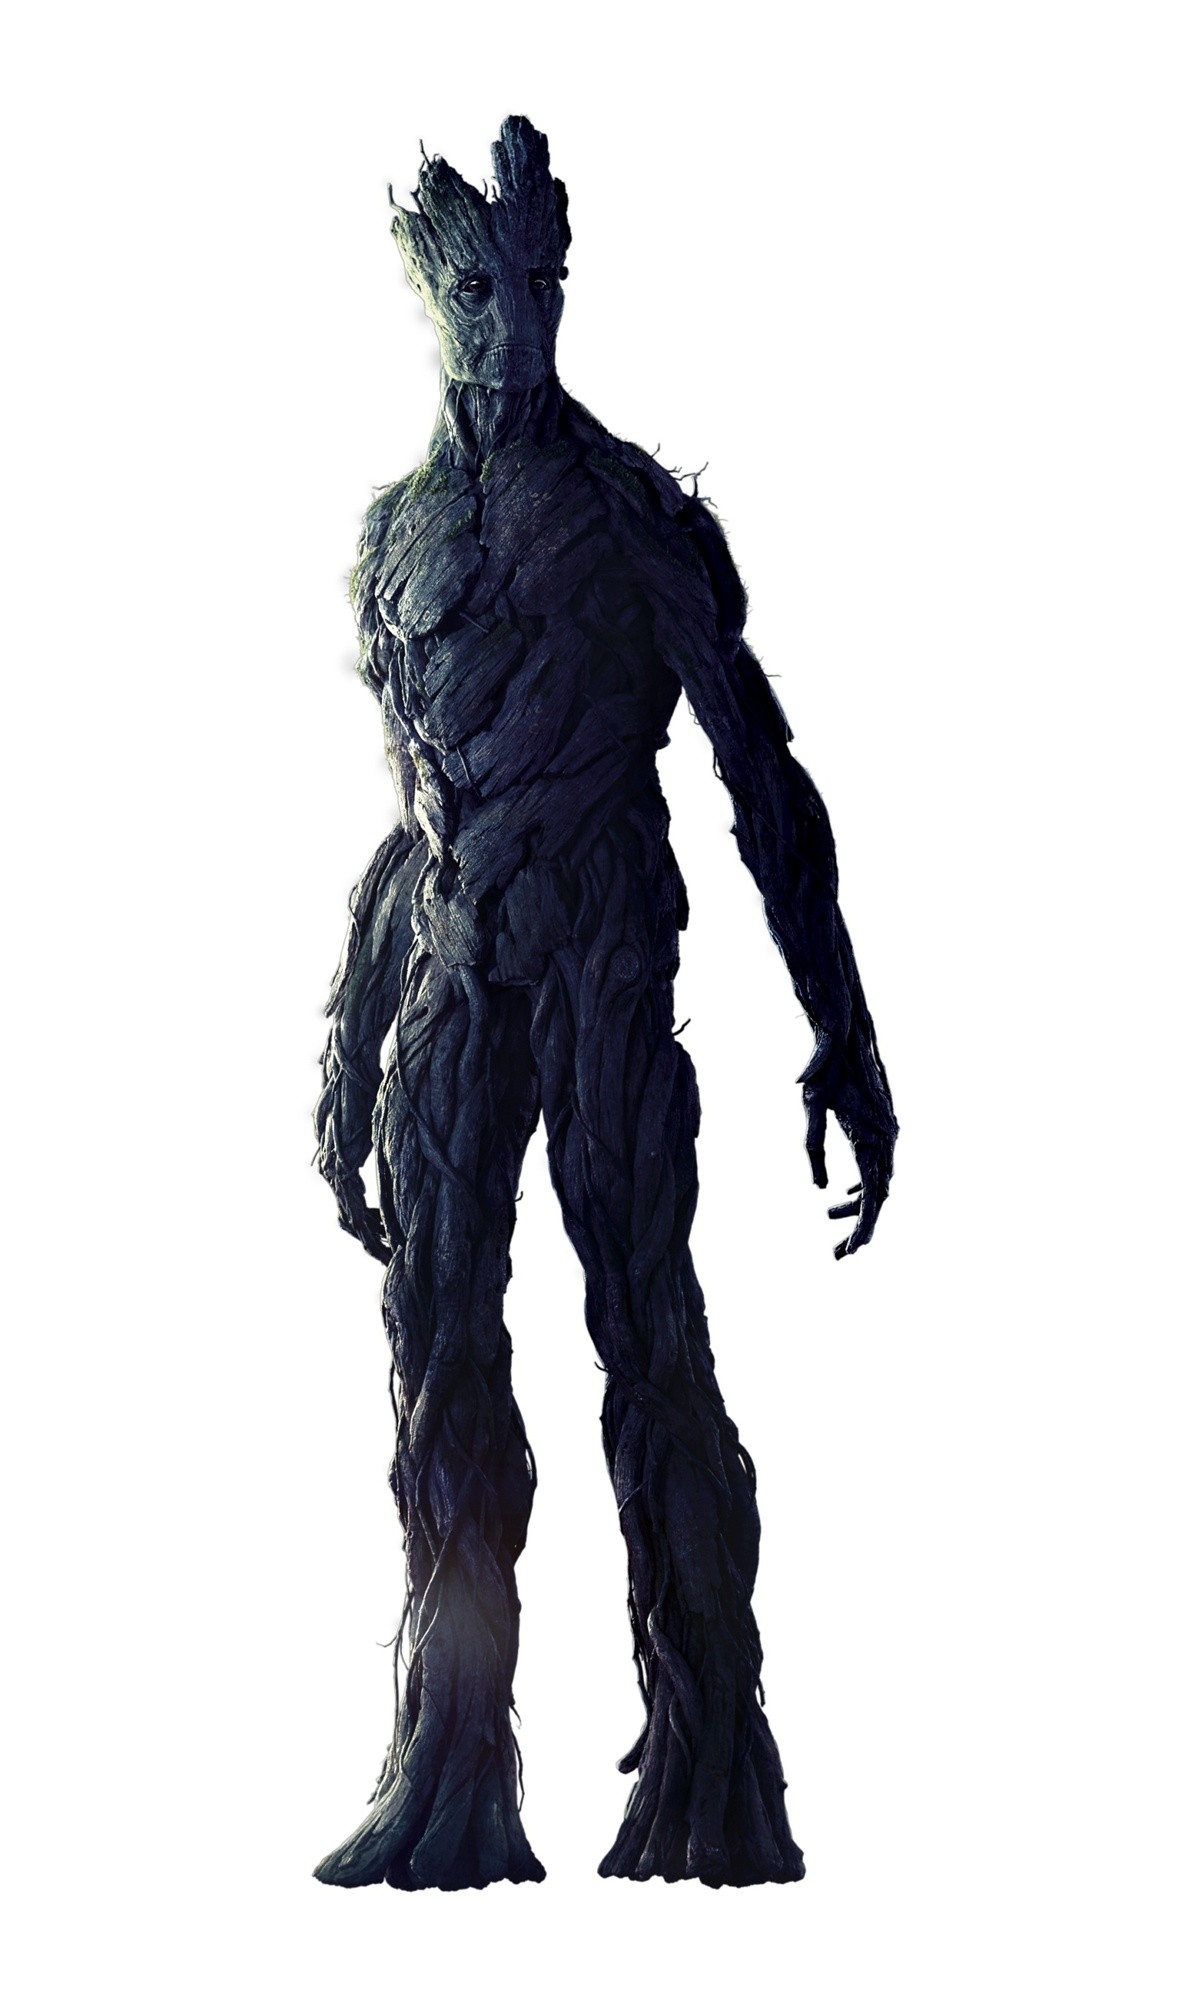 Groot from Marvel Studios' Guardians of the Galaxy (2014)